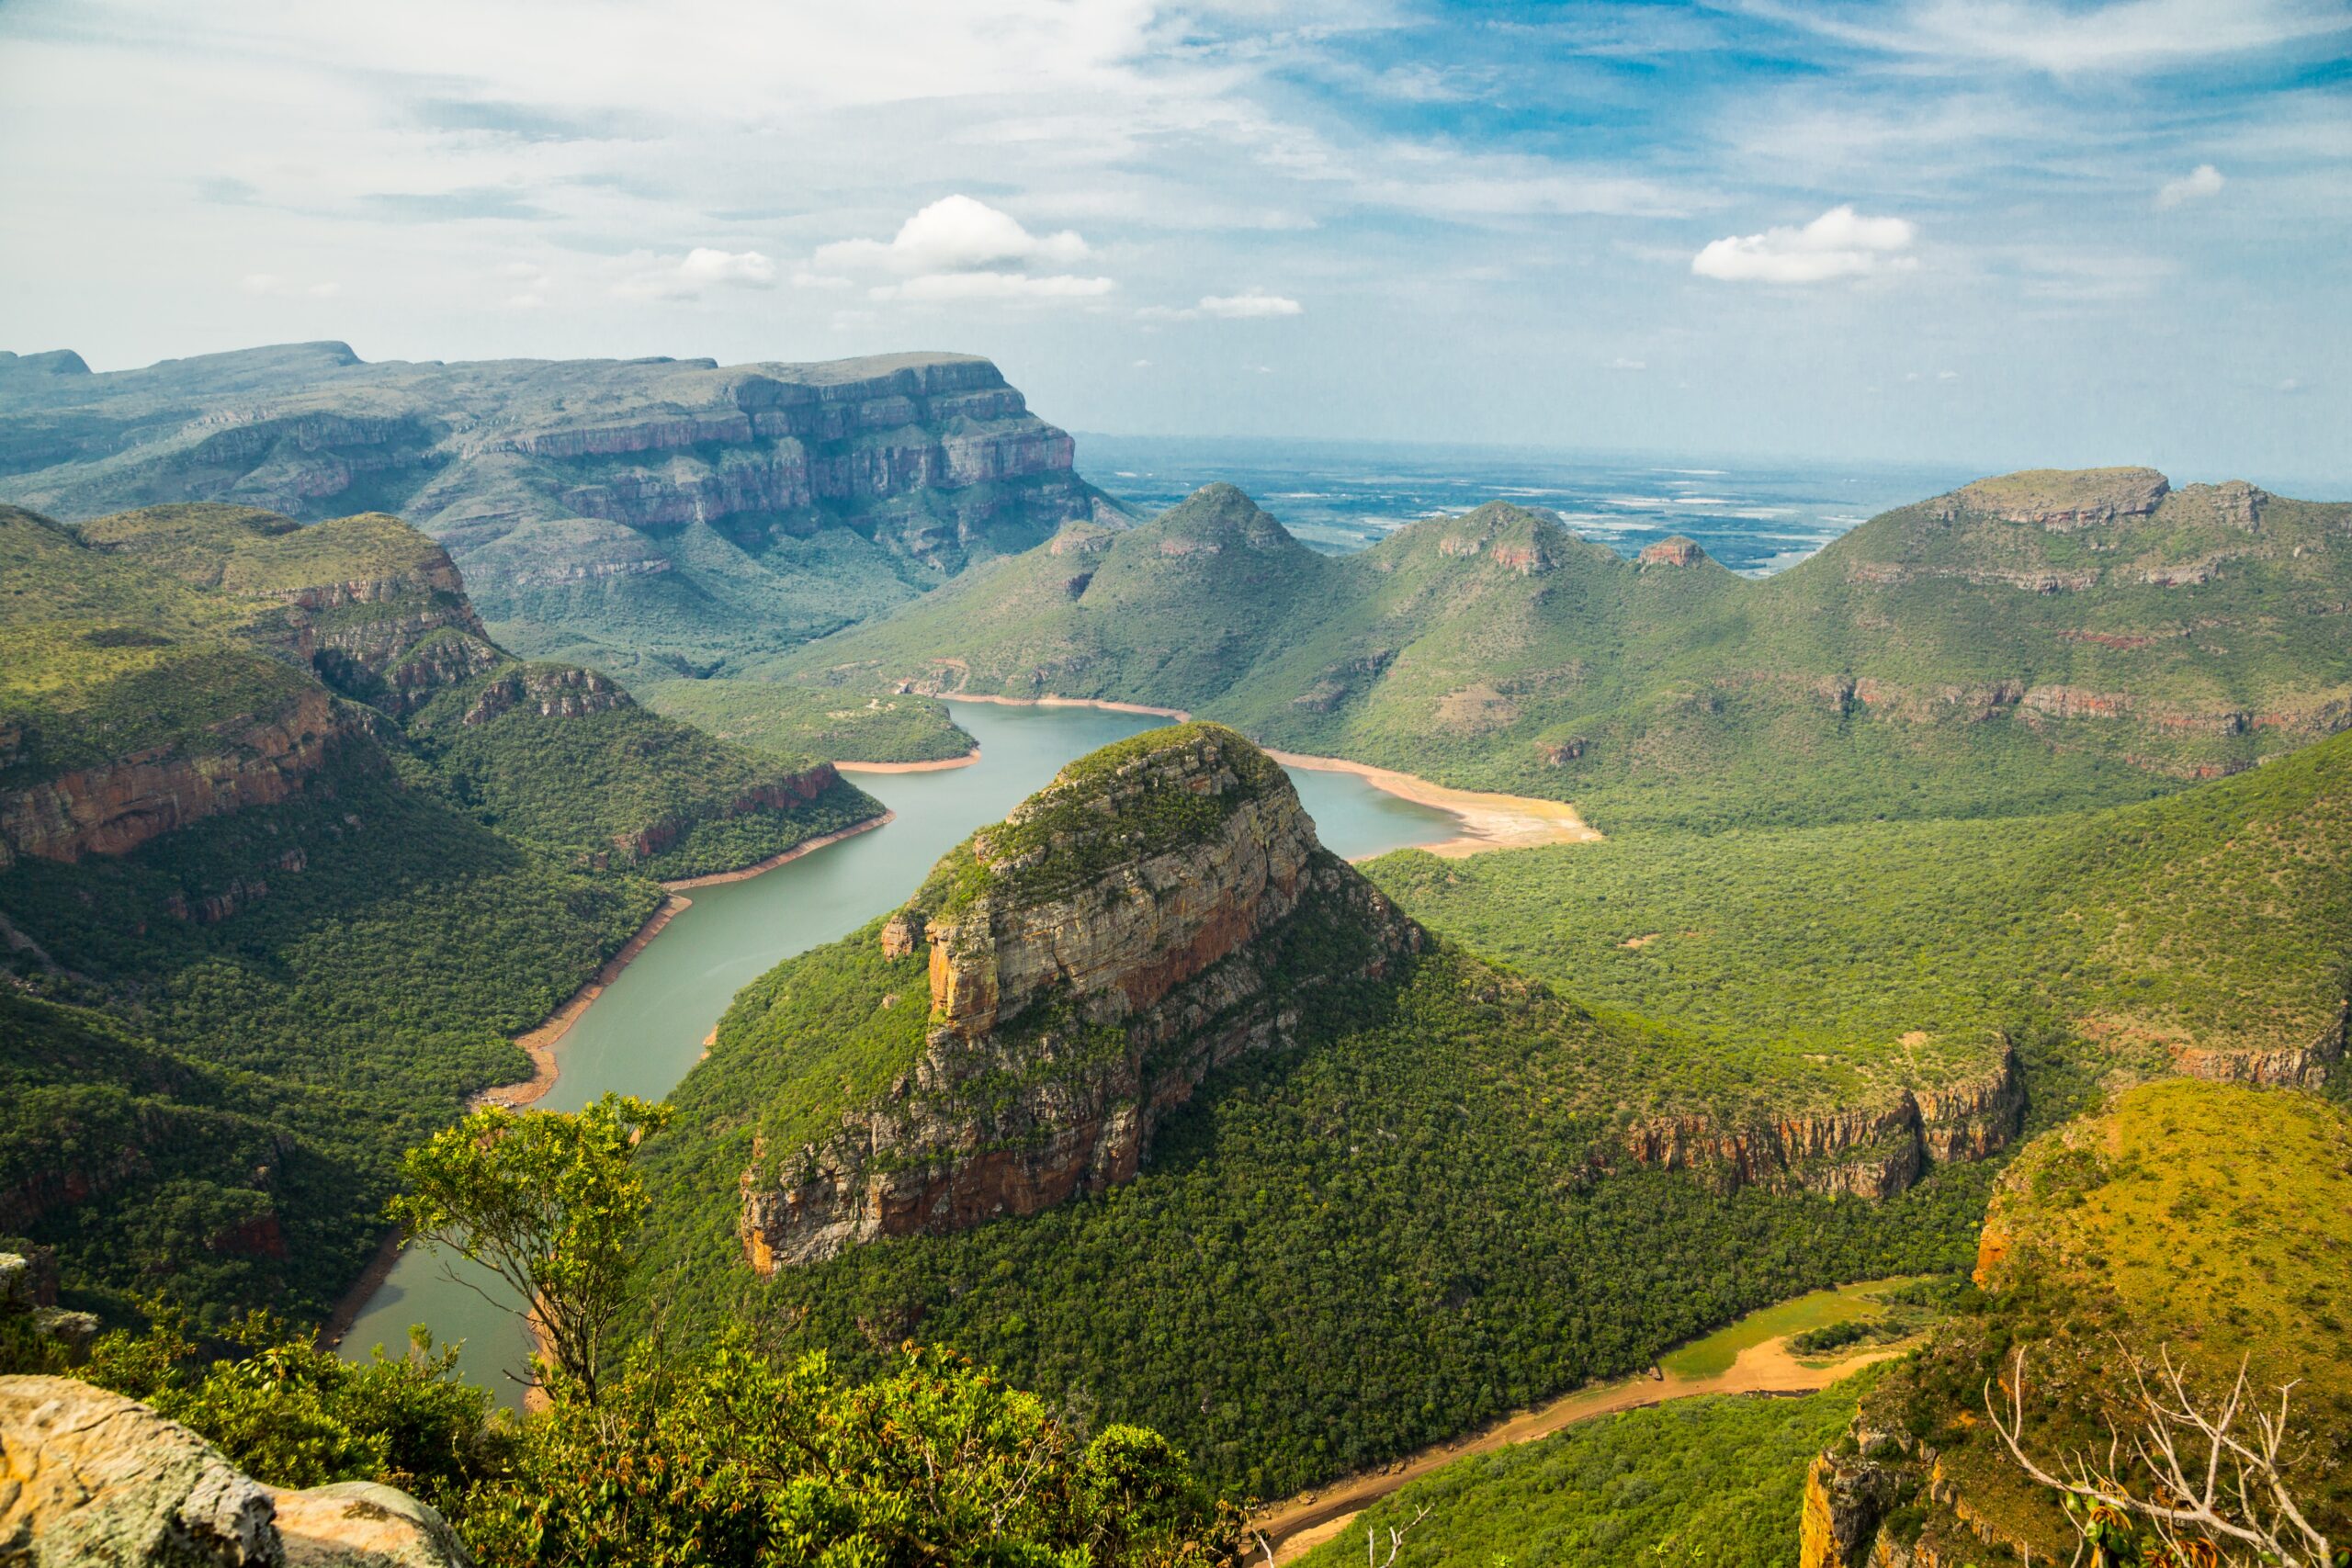 Opportunities Exist for South Africa to Become a Sustainable Low-Carbon Economy